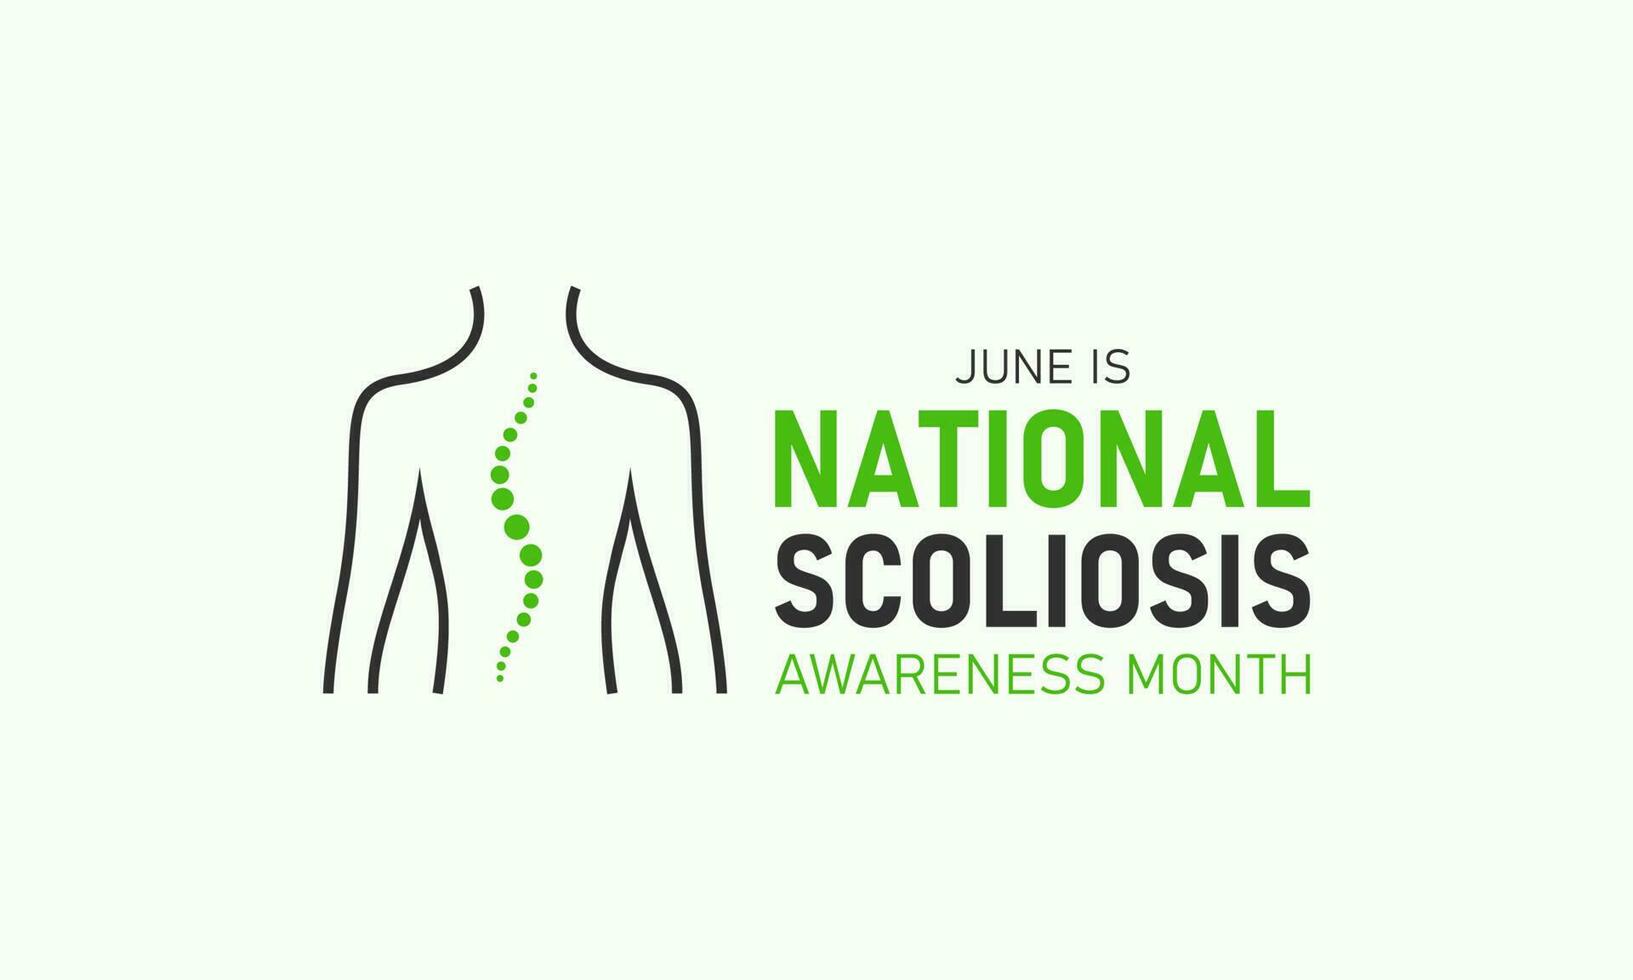 National scoliosis awareness month is observed every year in june. June is scoliosis awareness month. Vector template for banner, greeting card, poster with background. Vector illustration.